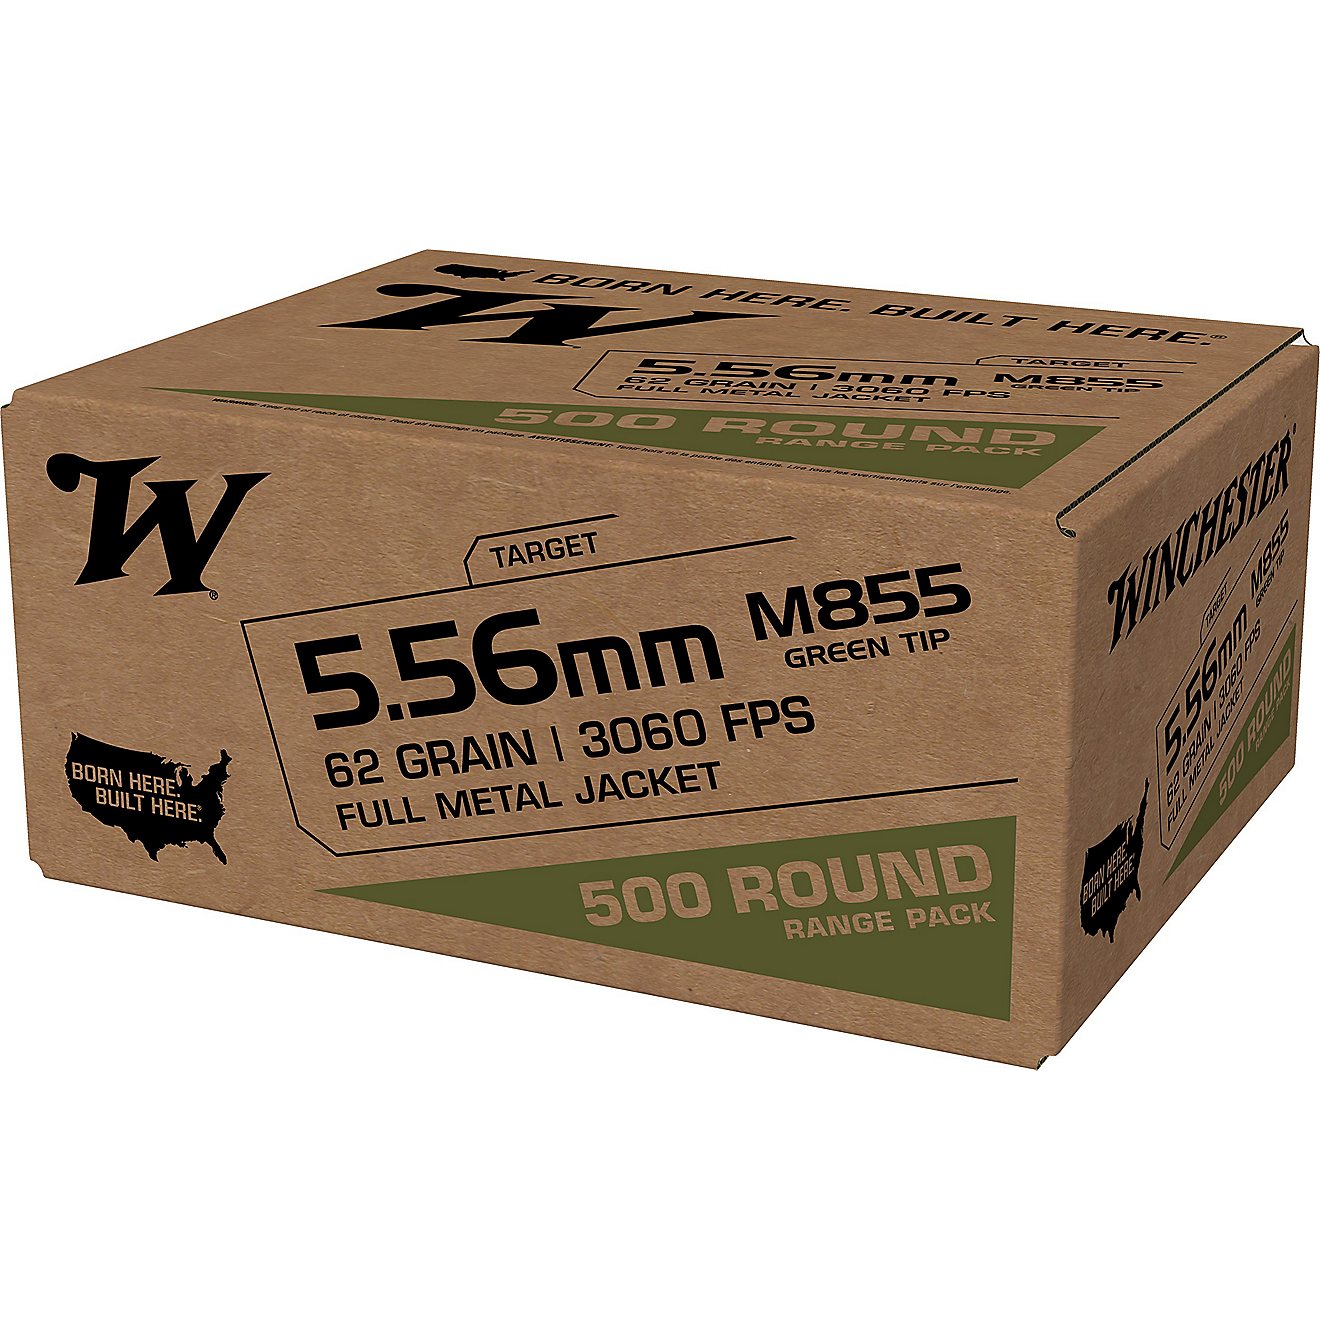 Winchester USA 5.56mm M855 Full Metal Jacket Lead Core Ammunition - 500 Rounds                                                   - view number 1